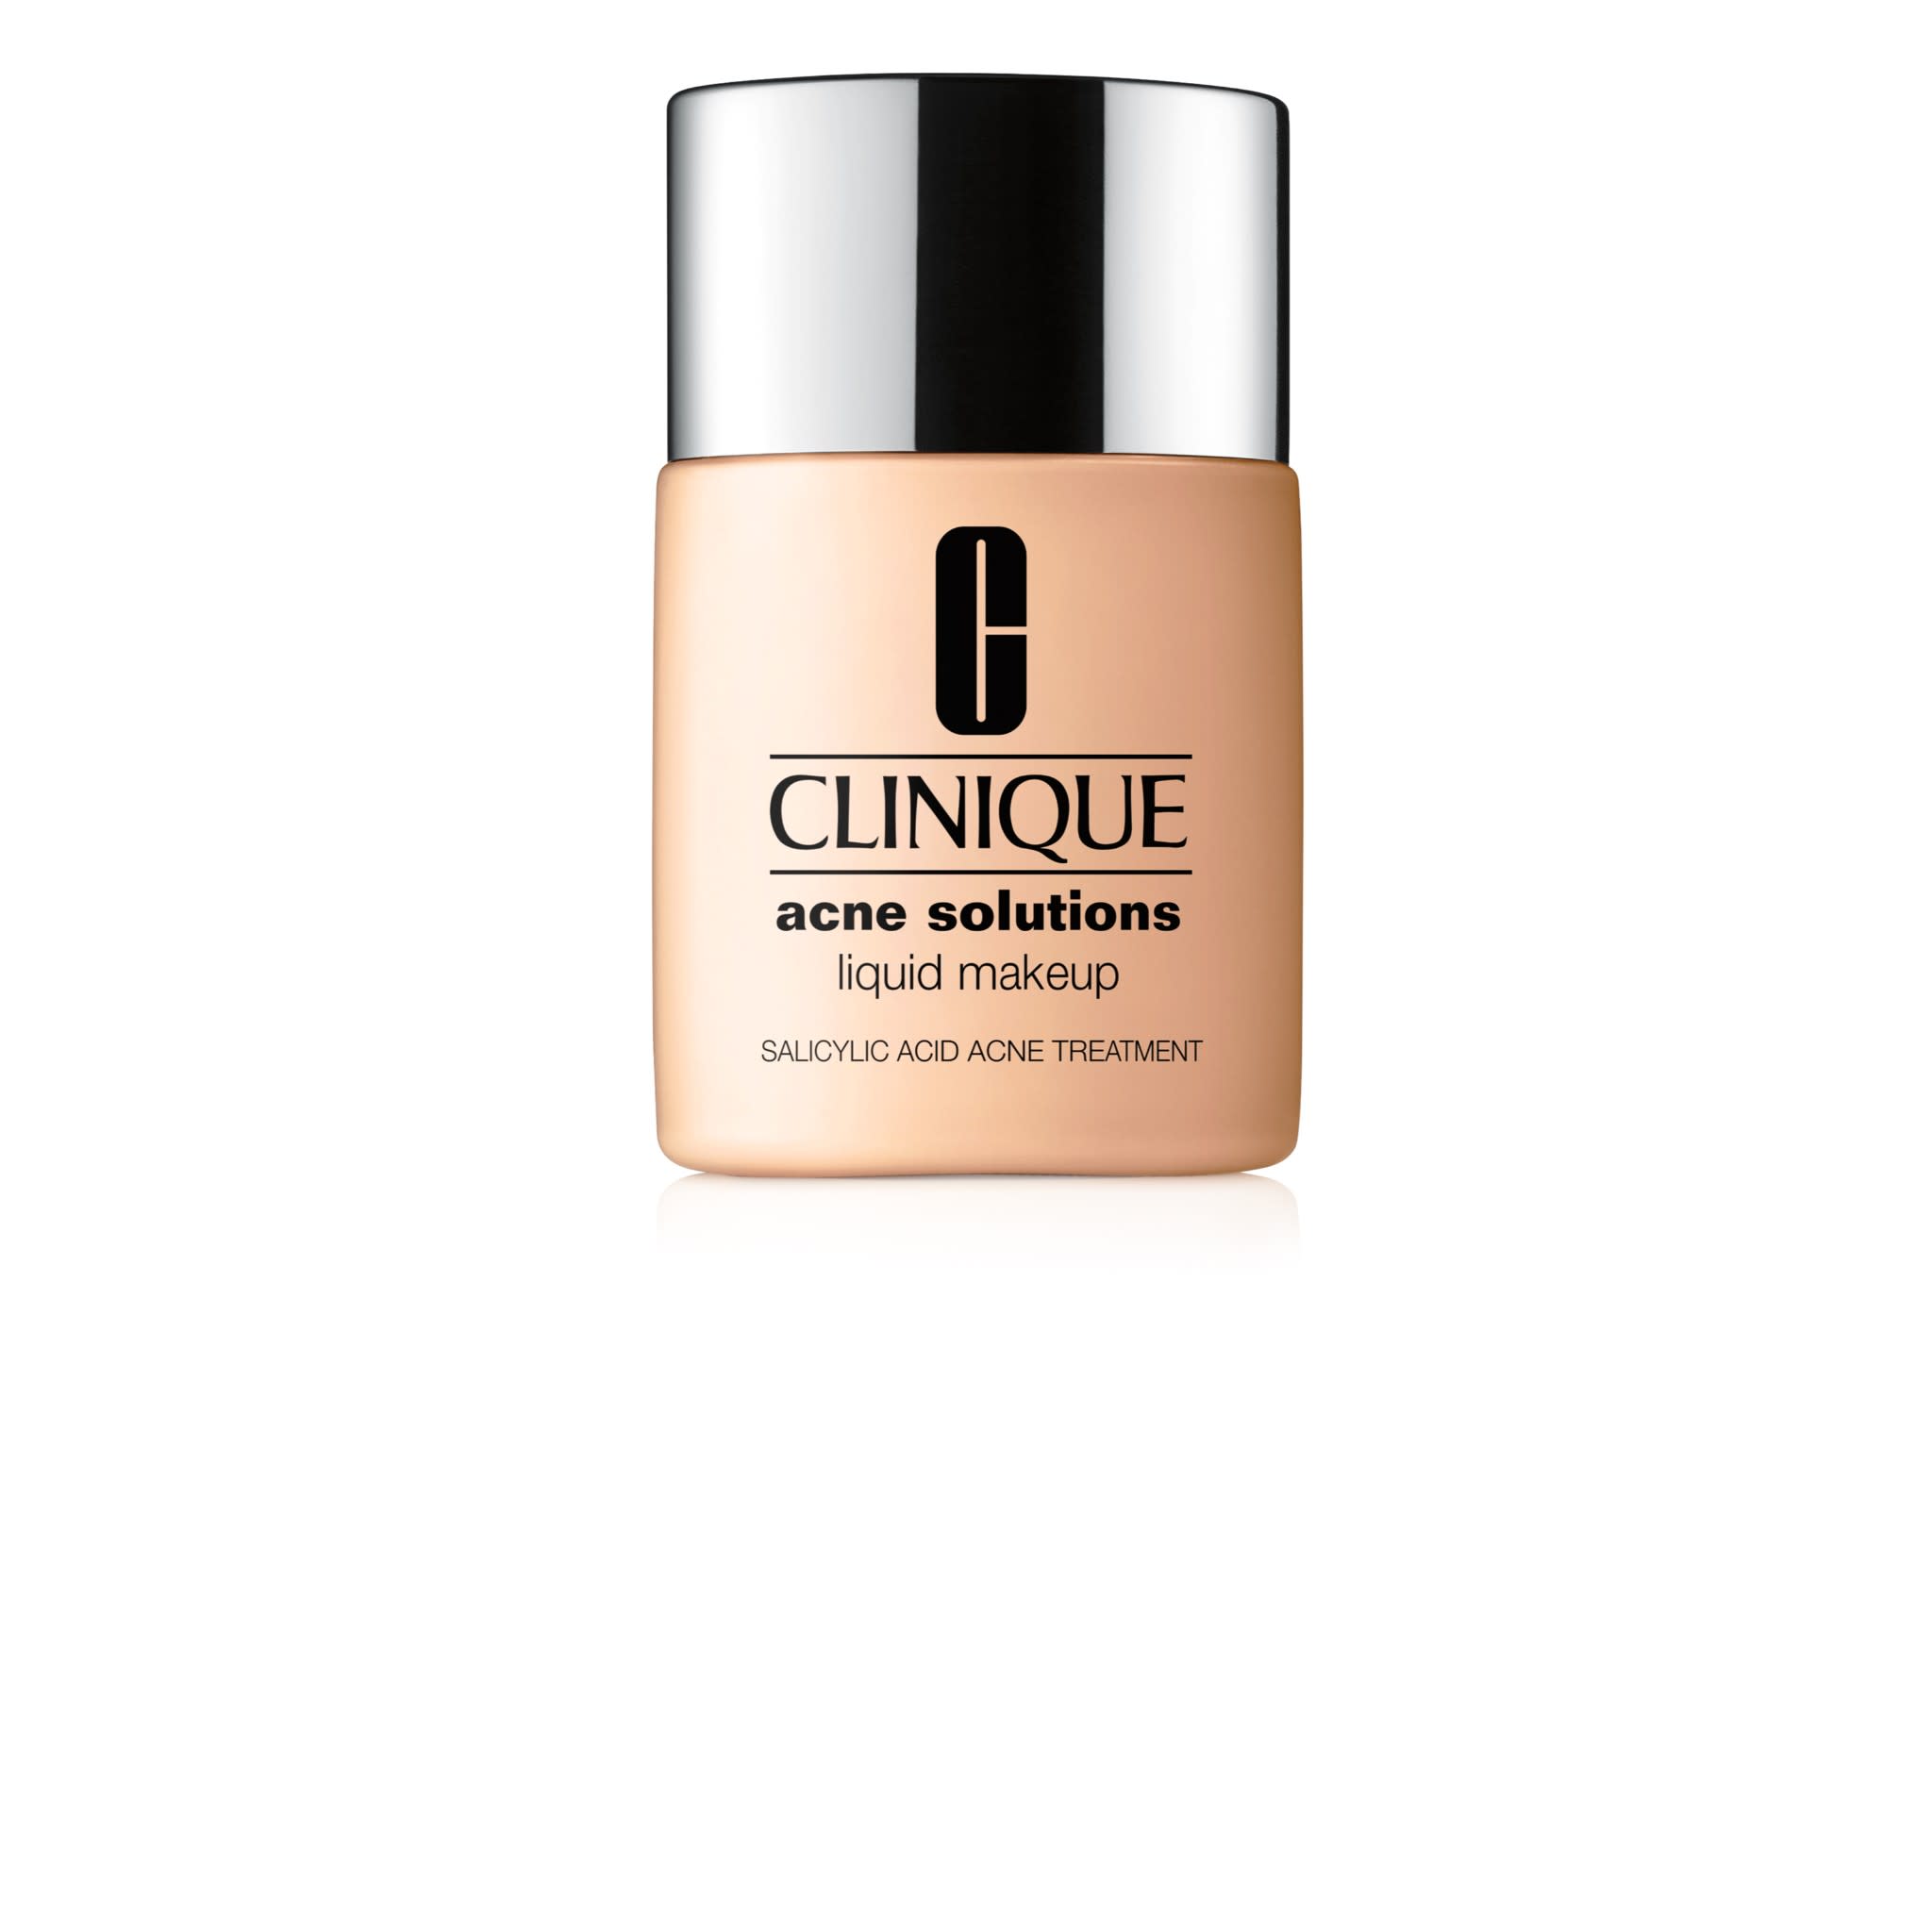 Clinique Acne Solutions Liquid Makeup Color/Shade variant: Fresh Fair main image. This product is for light complexions